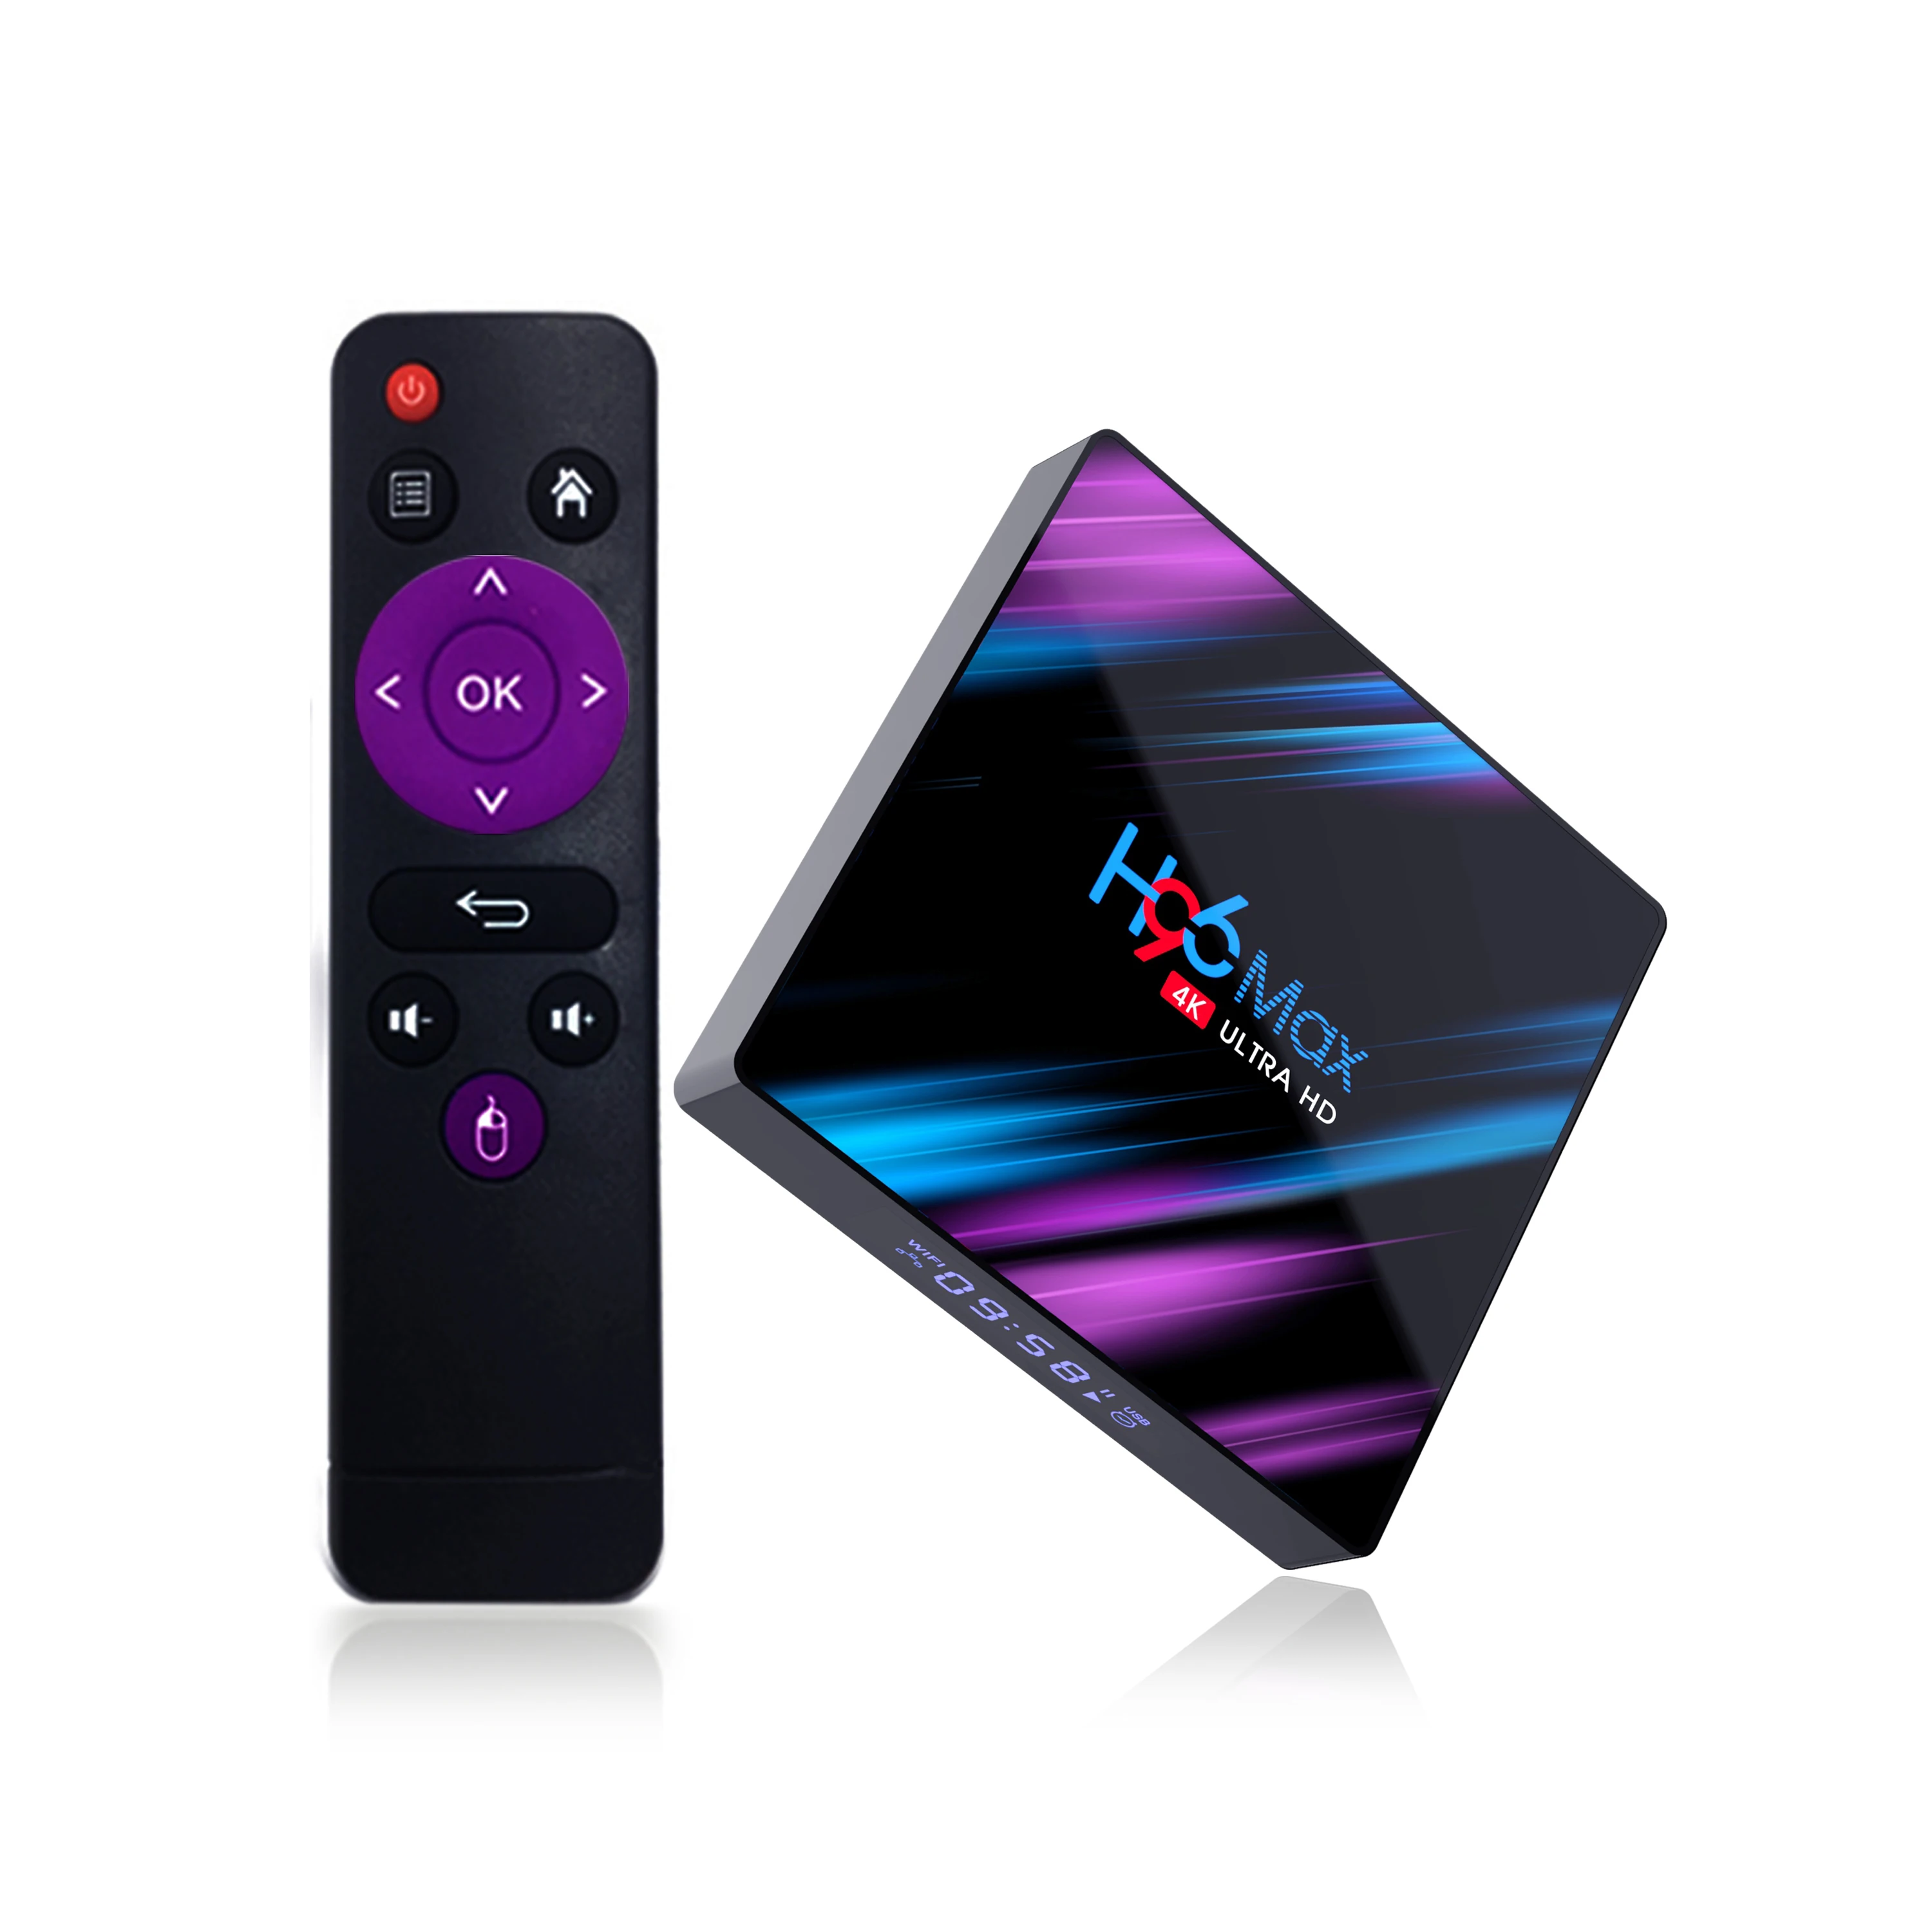 

H96 MAX RK3318 Quad Core RAM 4GB ROM 32GB 2.4G/5G Dual Wifi OS Android 9.0 TV Box 4K Media Player